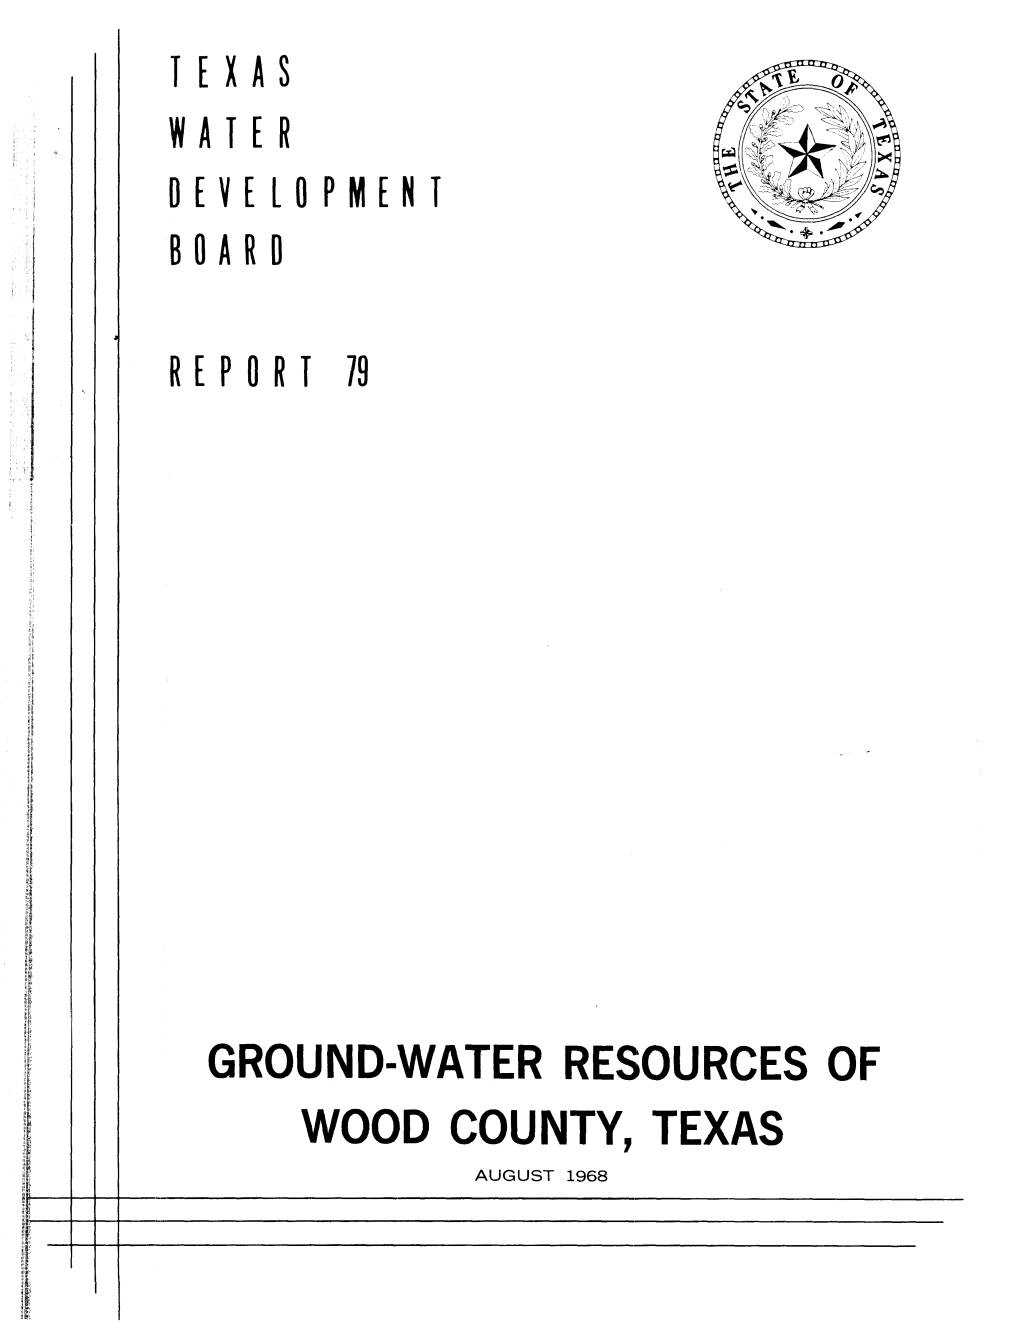 Ground-Water Resources of Wood County, Texas